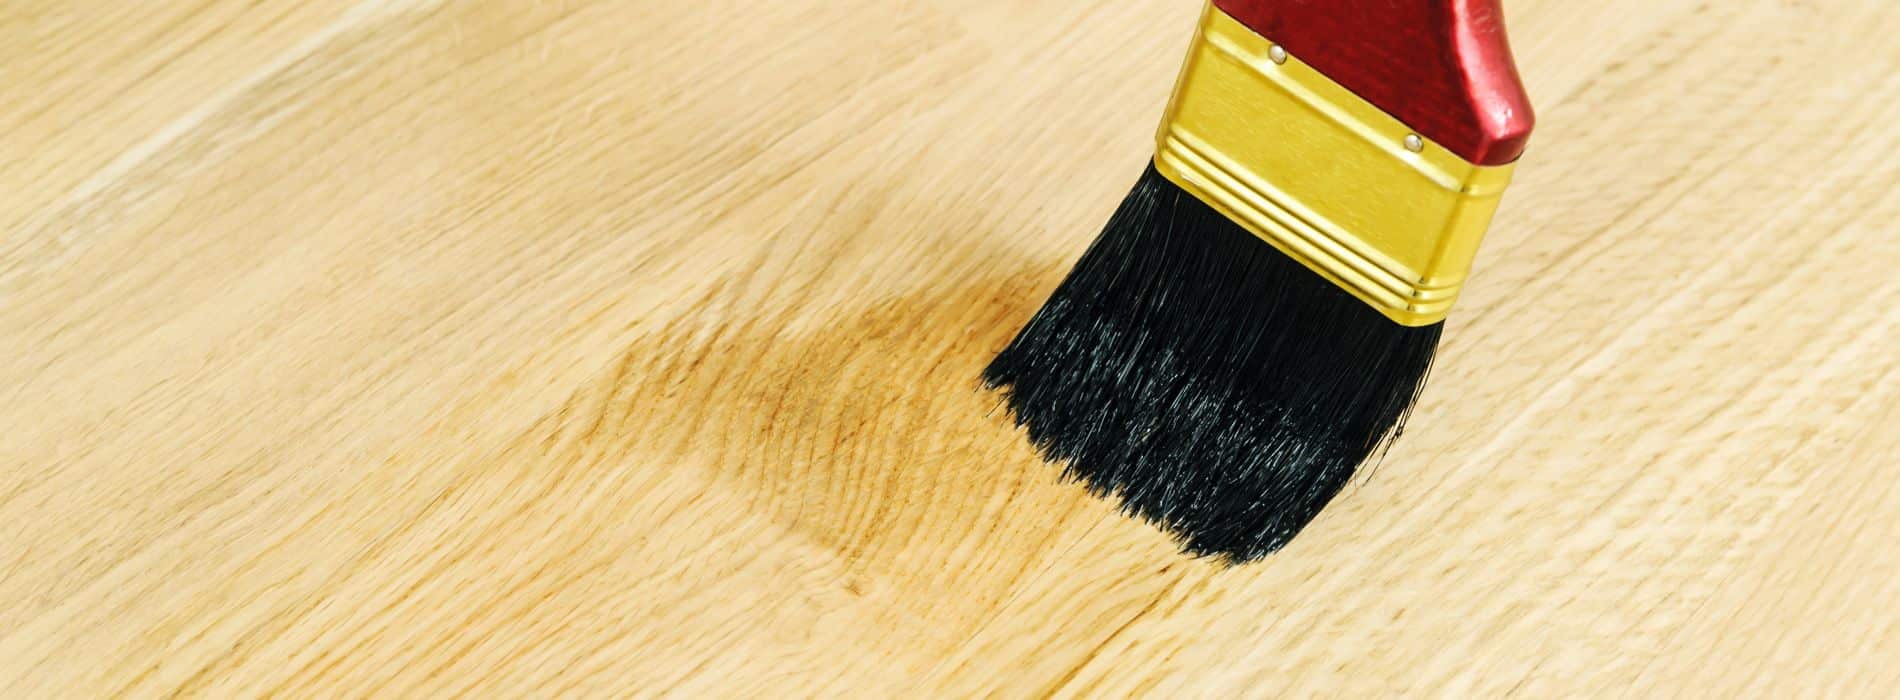 A red and black brush sitting on top of a wooden floor.